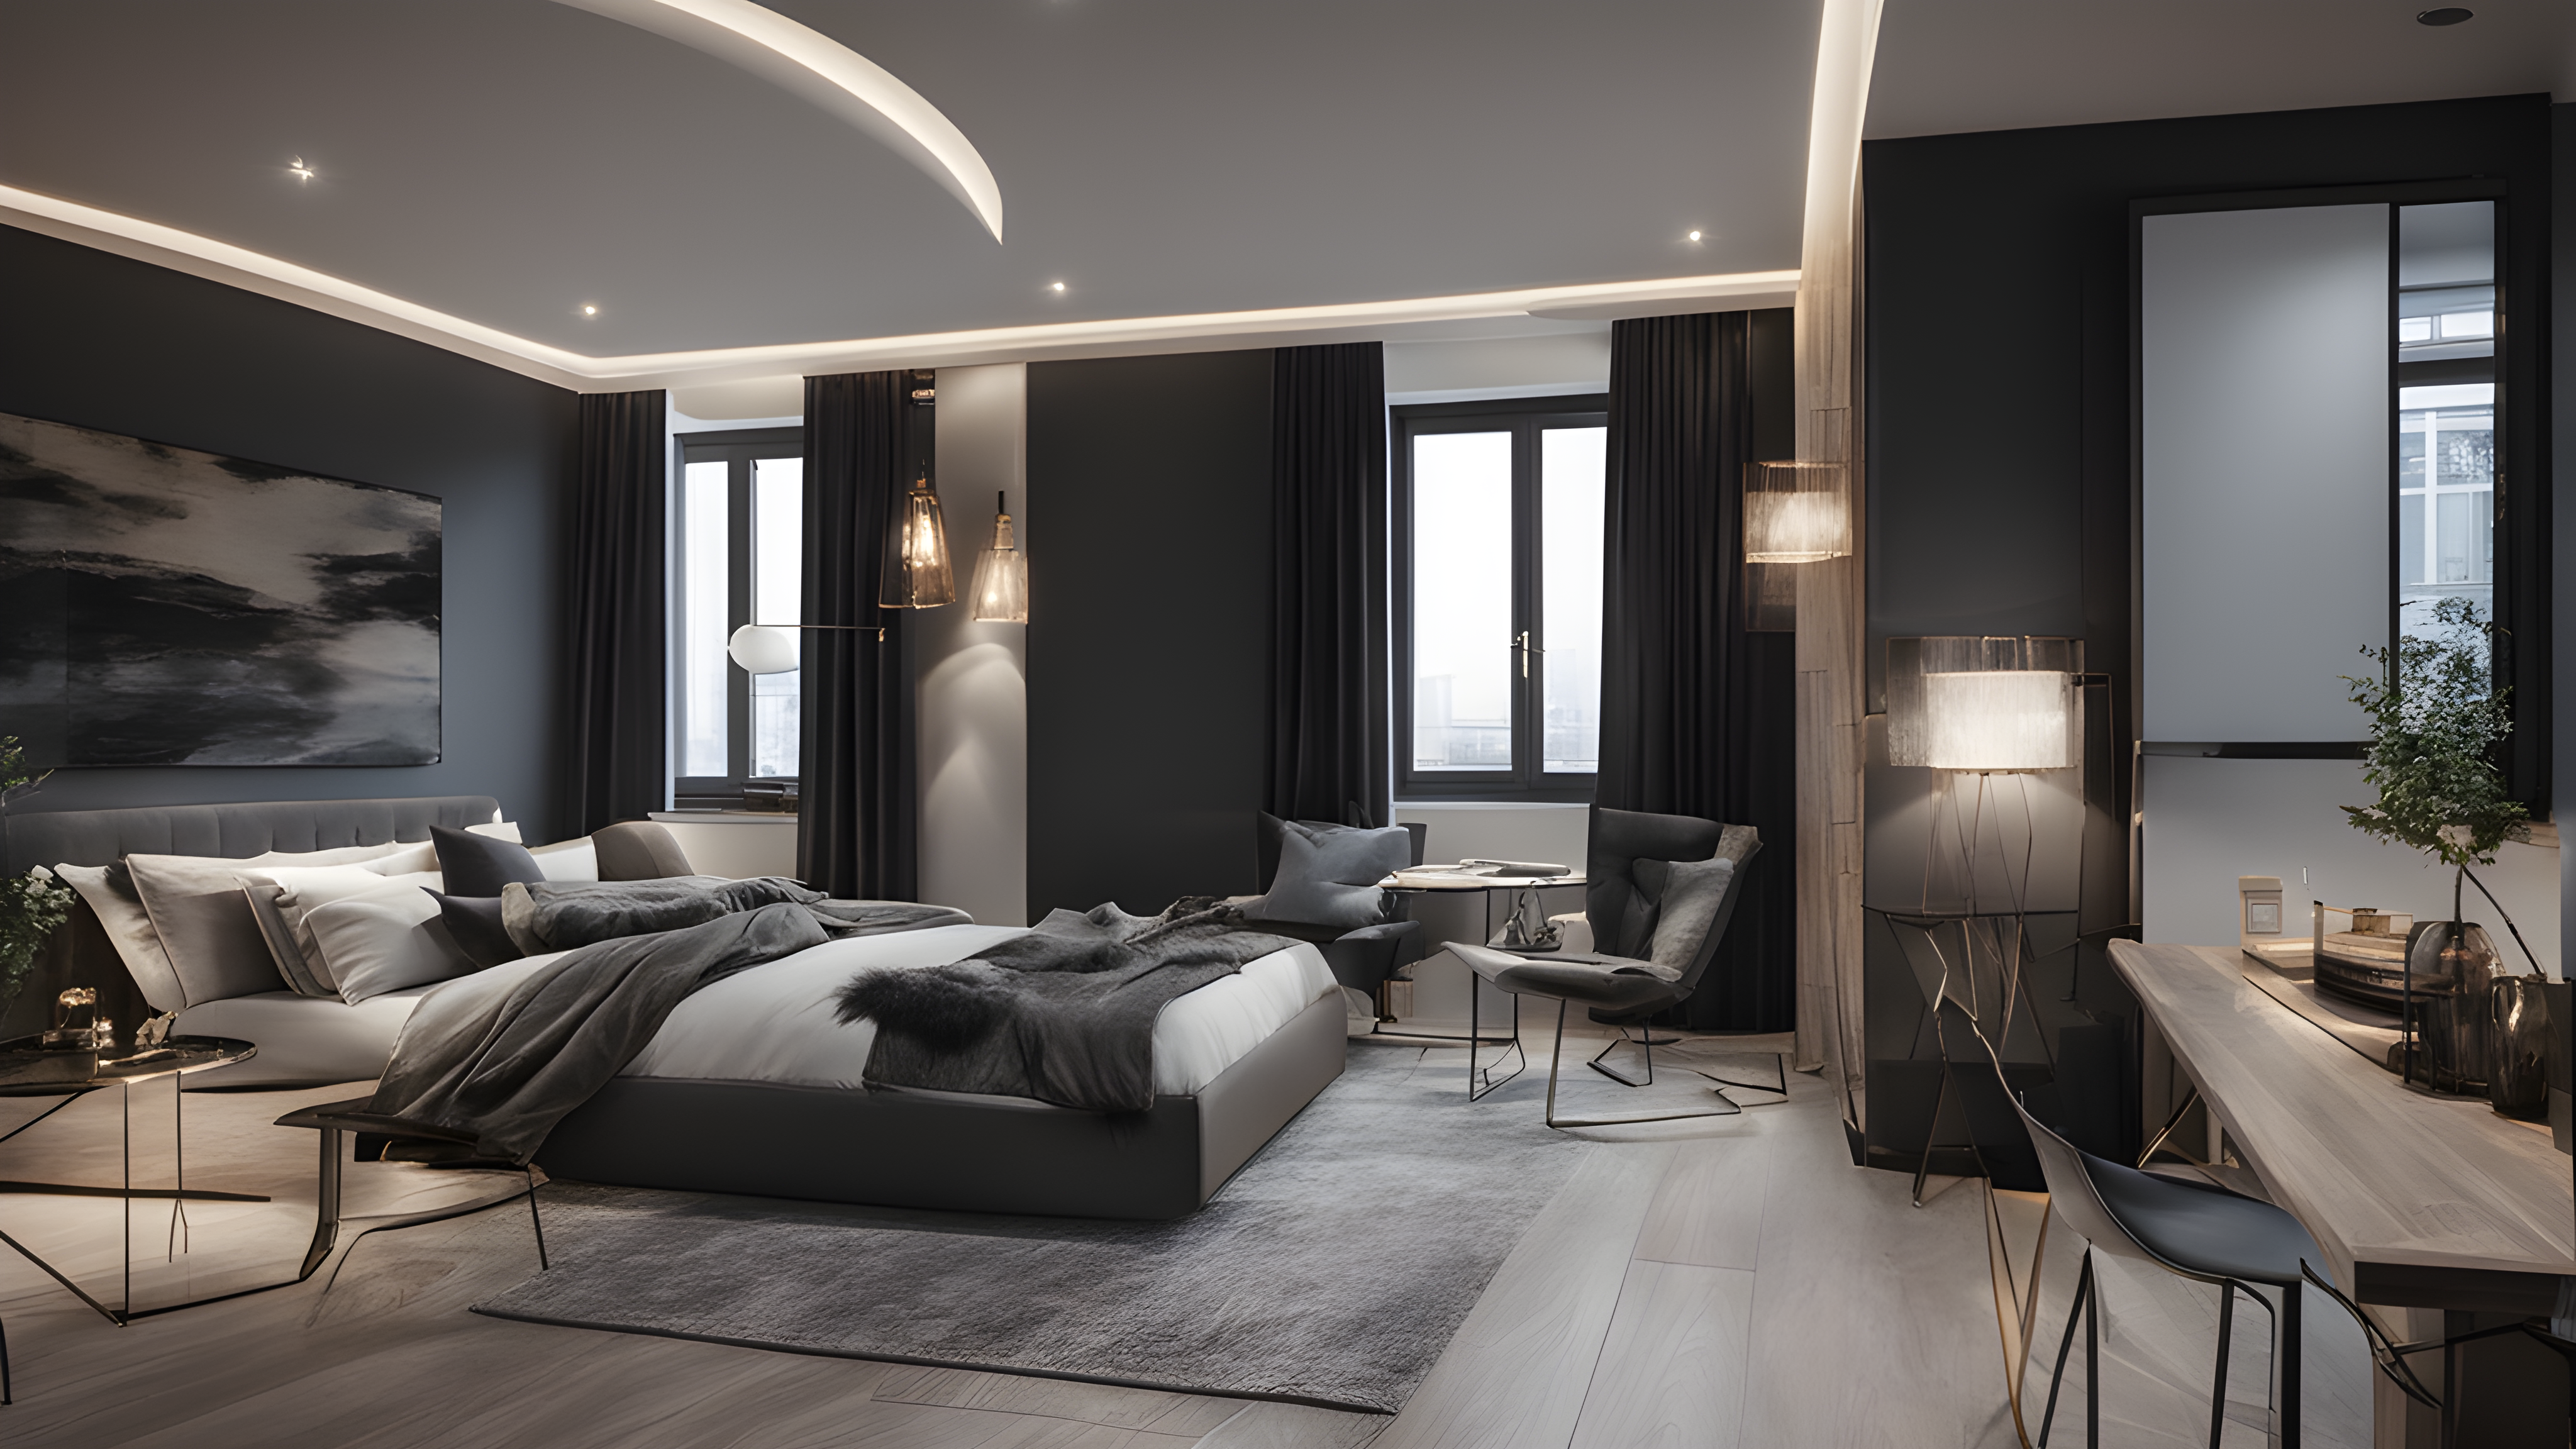 new-build-luxury-apartment-in-the-city-inside-view-bedroom-high-quality-living-dark-interior-614947933